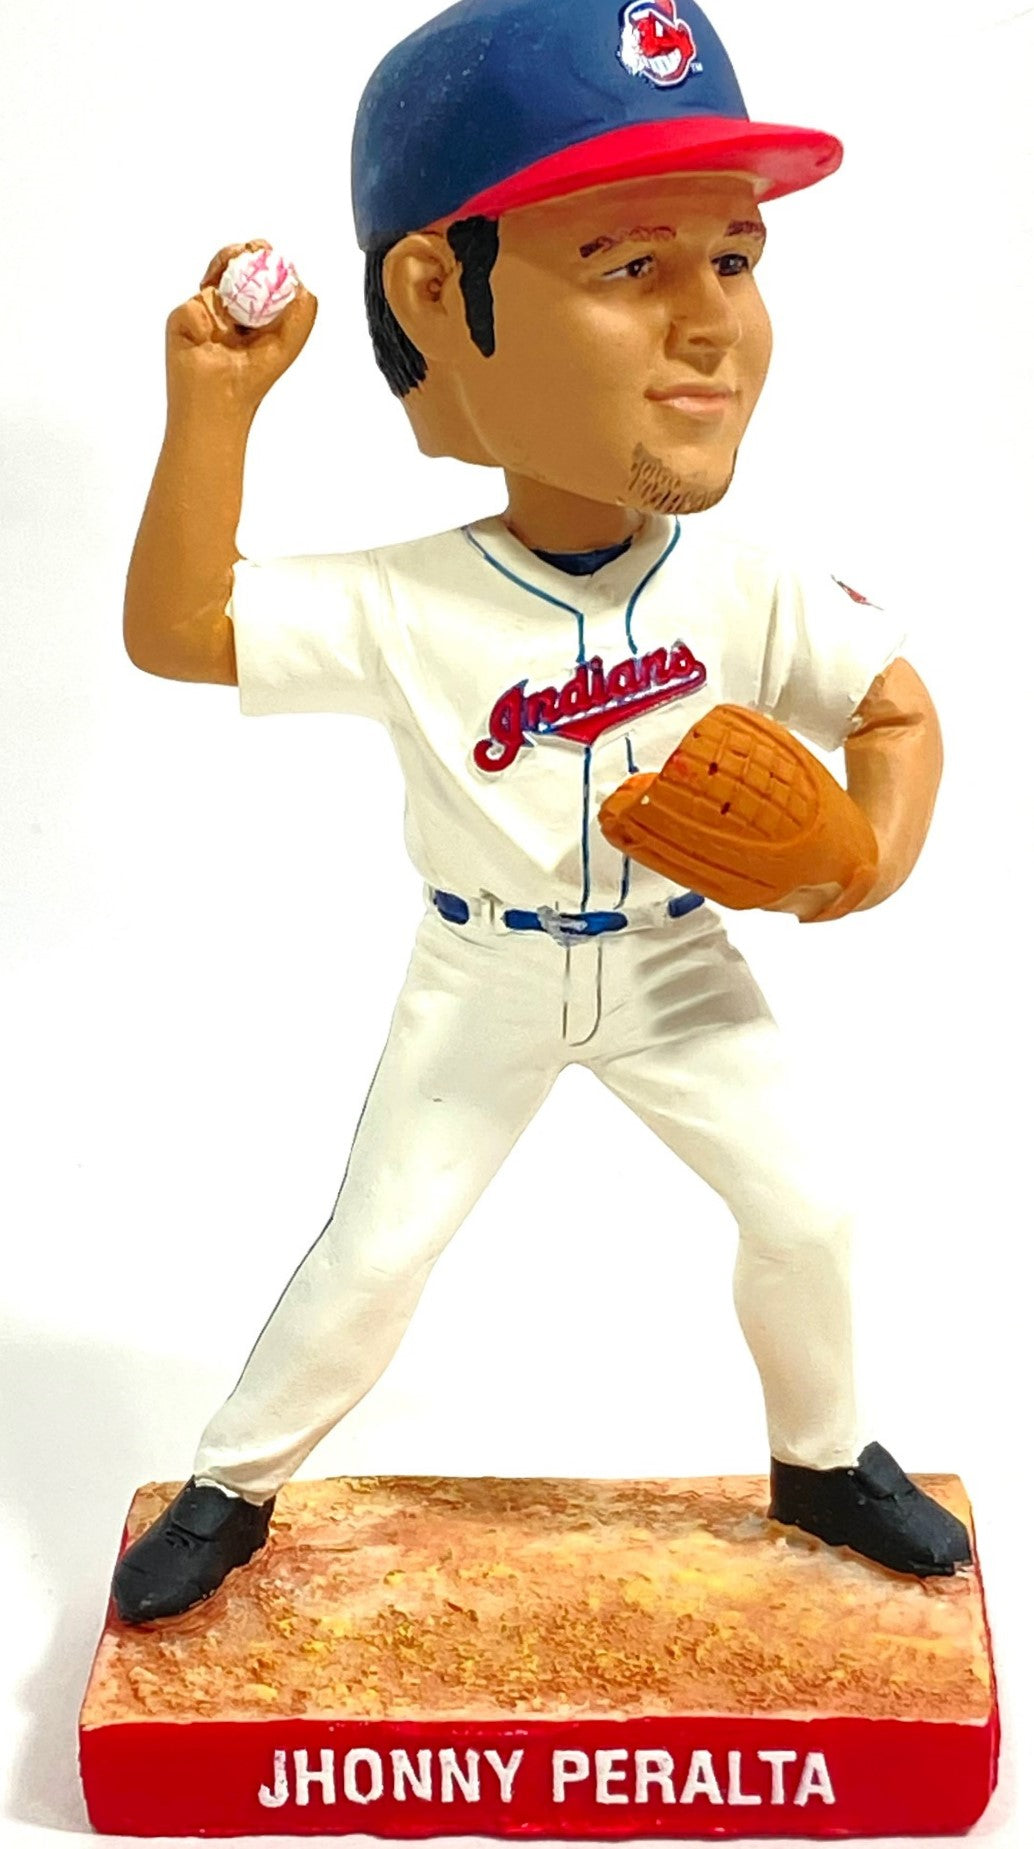 Jhonny Peralta 2008 MLB Cleveland Indians MLB Bobblehead (Used) By BD&A